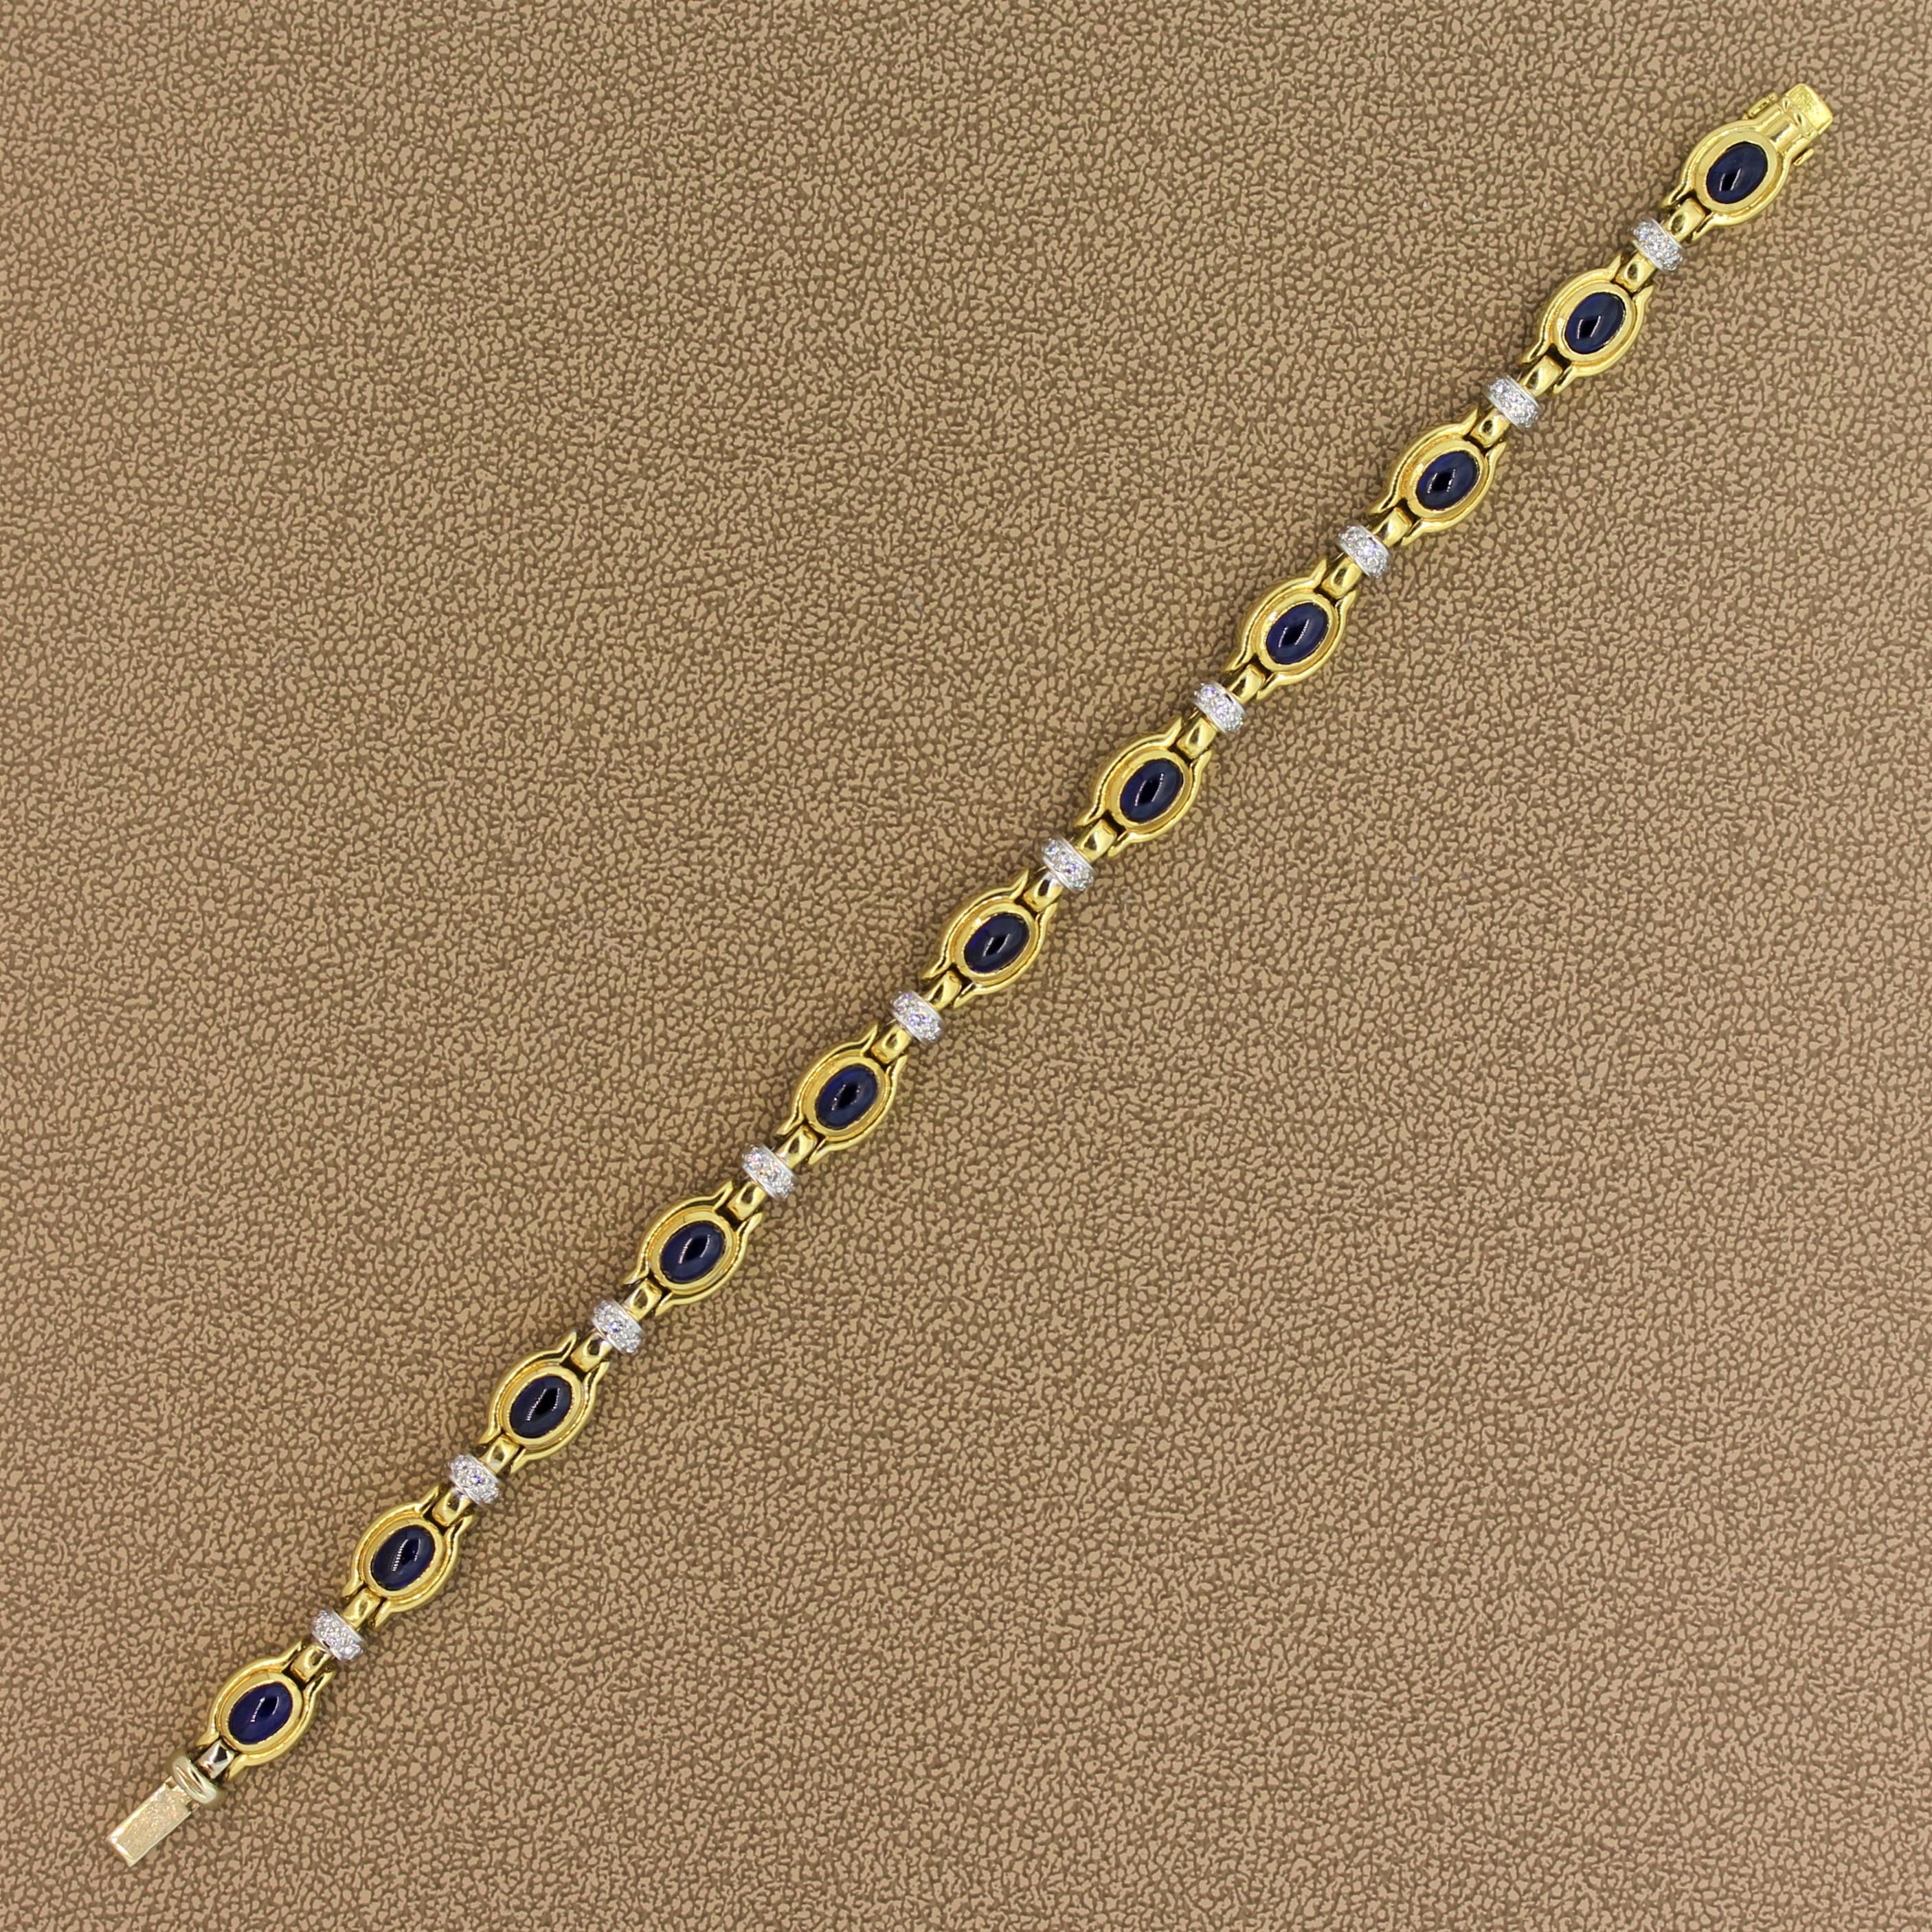 A timeless bracelet featuring 8.51 carats of vivid blue sapphires. The cabochon sapphires are bezel set in an 18K yellow gold setting with 0.53 carats of round cut diamonds between each link in an 18K white gold. A seamless box clasp with a hidden